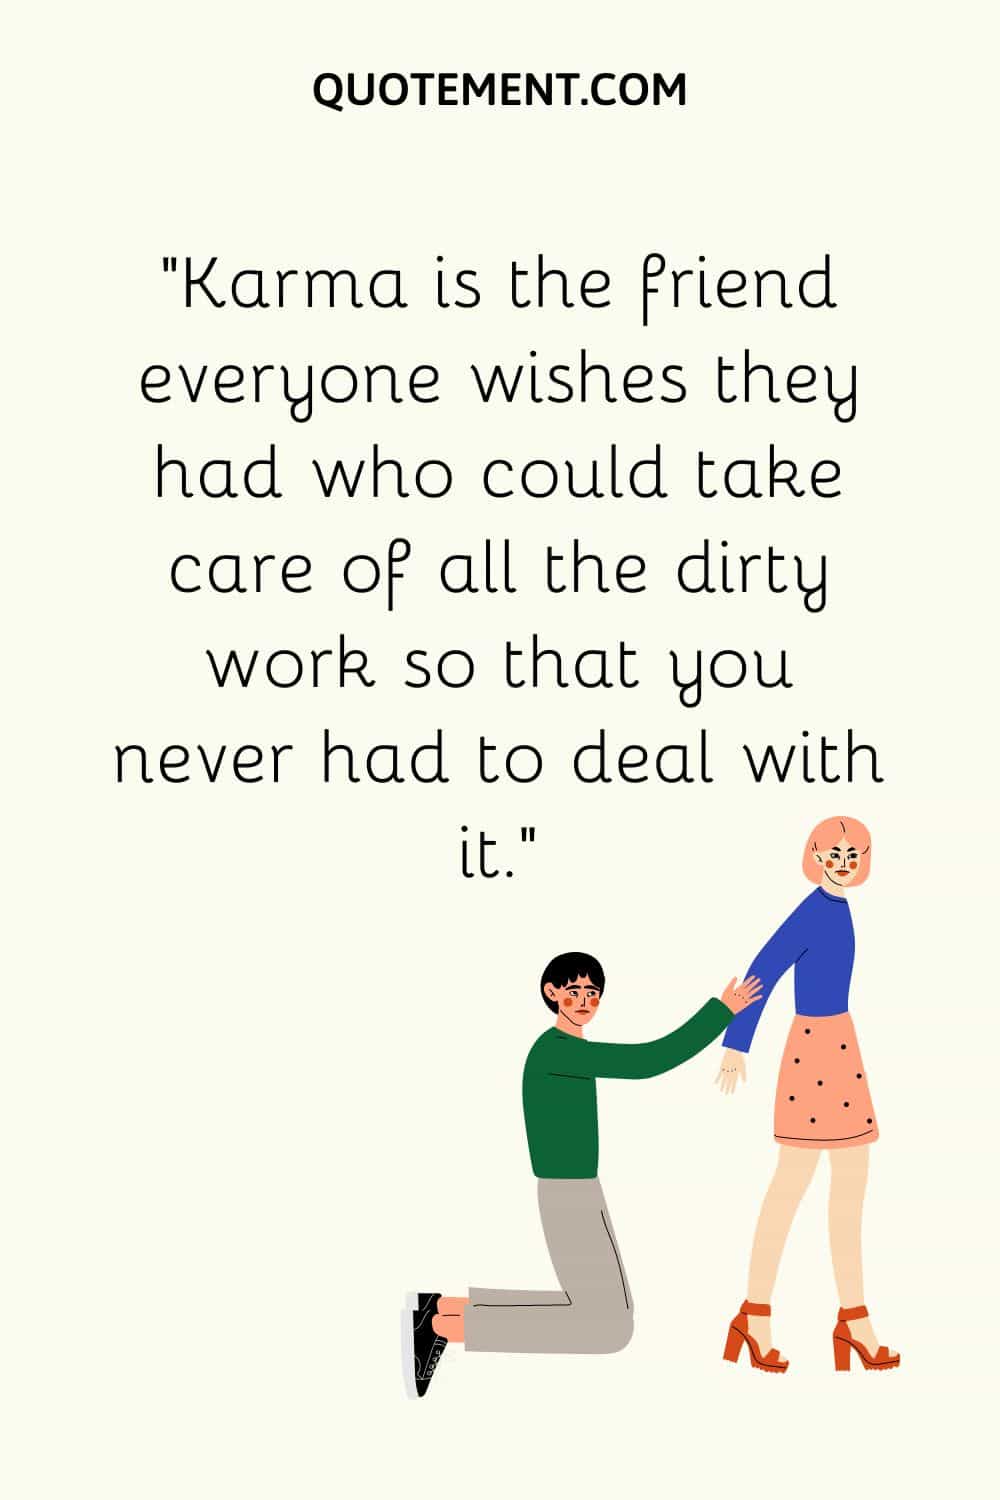 Karma is the friend everyone wishes they had who could take care of all the dirty work so that you never had to deal with it